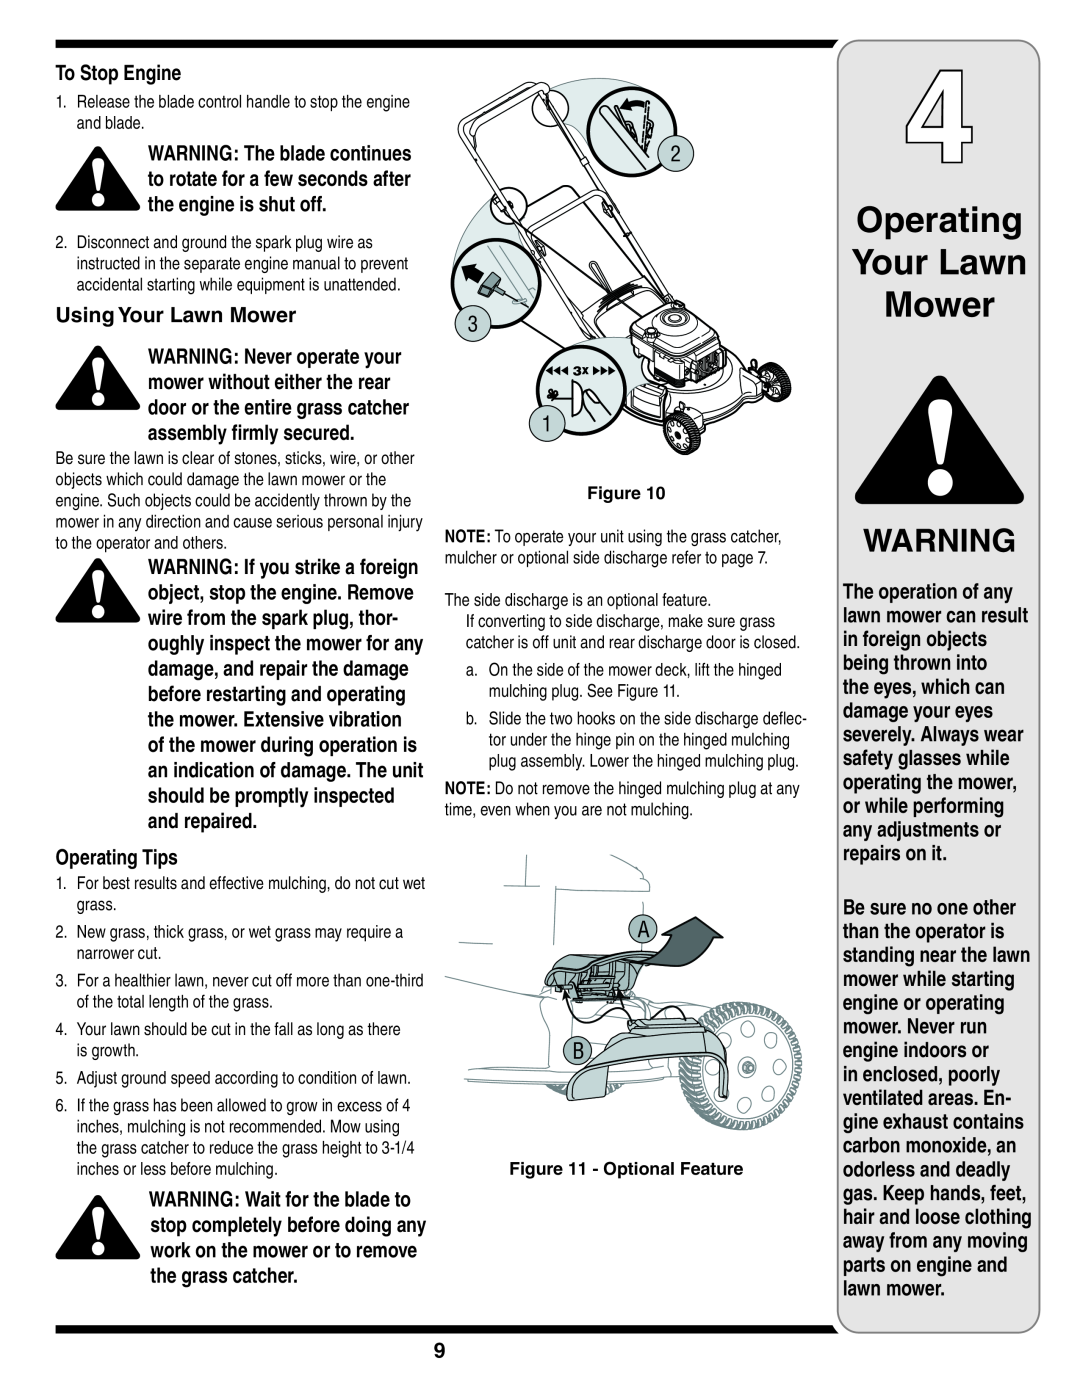 Troy-Bilt 540 Series warranty Operating Your Lawn Mower, To Stop Engine, Using Your Lawn Mower, Operating Tips 